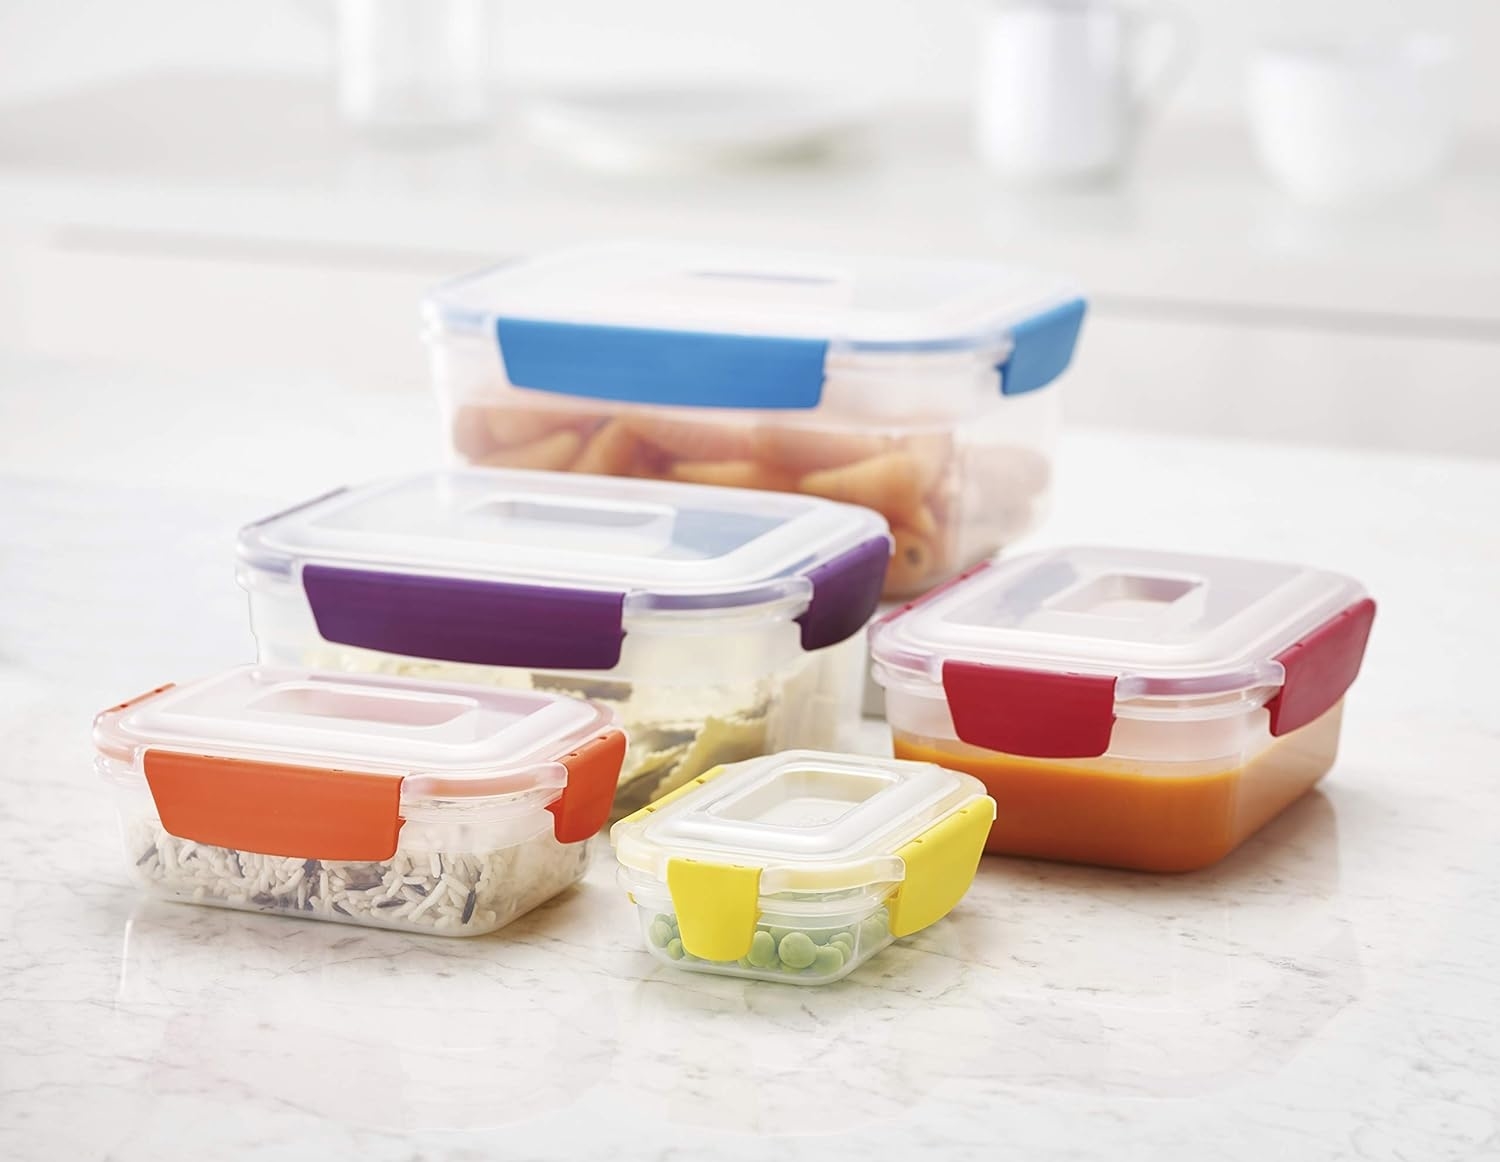 Various containers holding food and topped with colorful lids